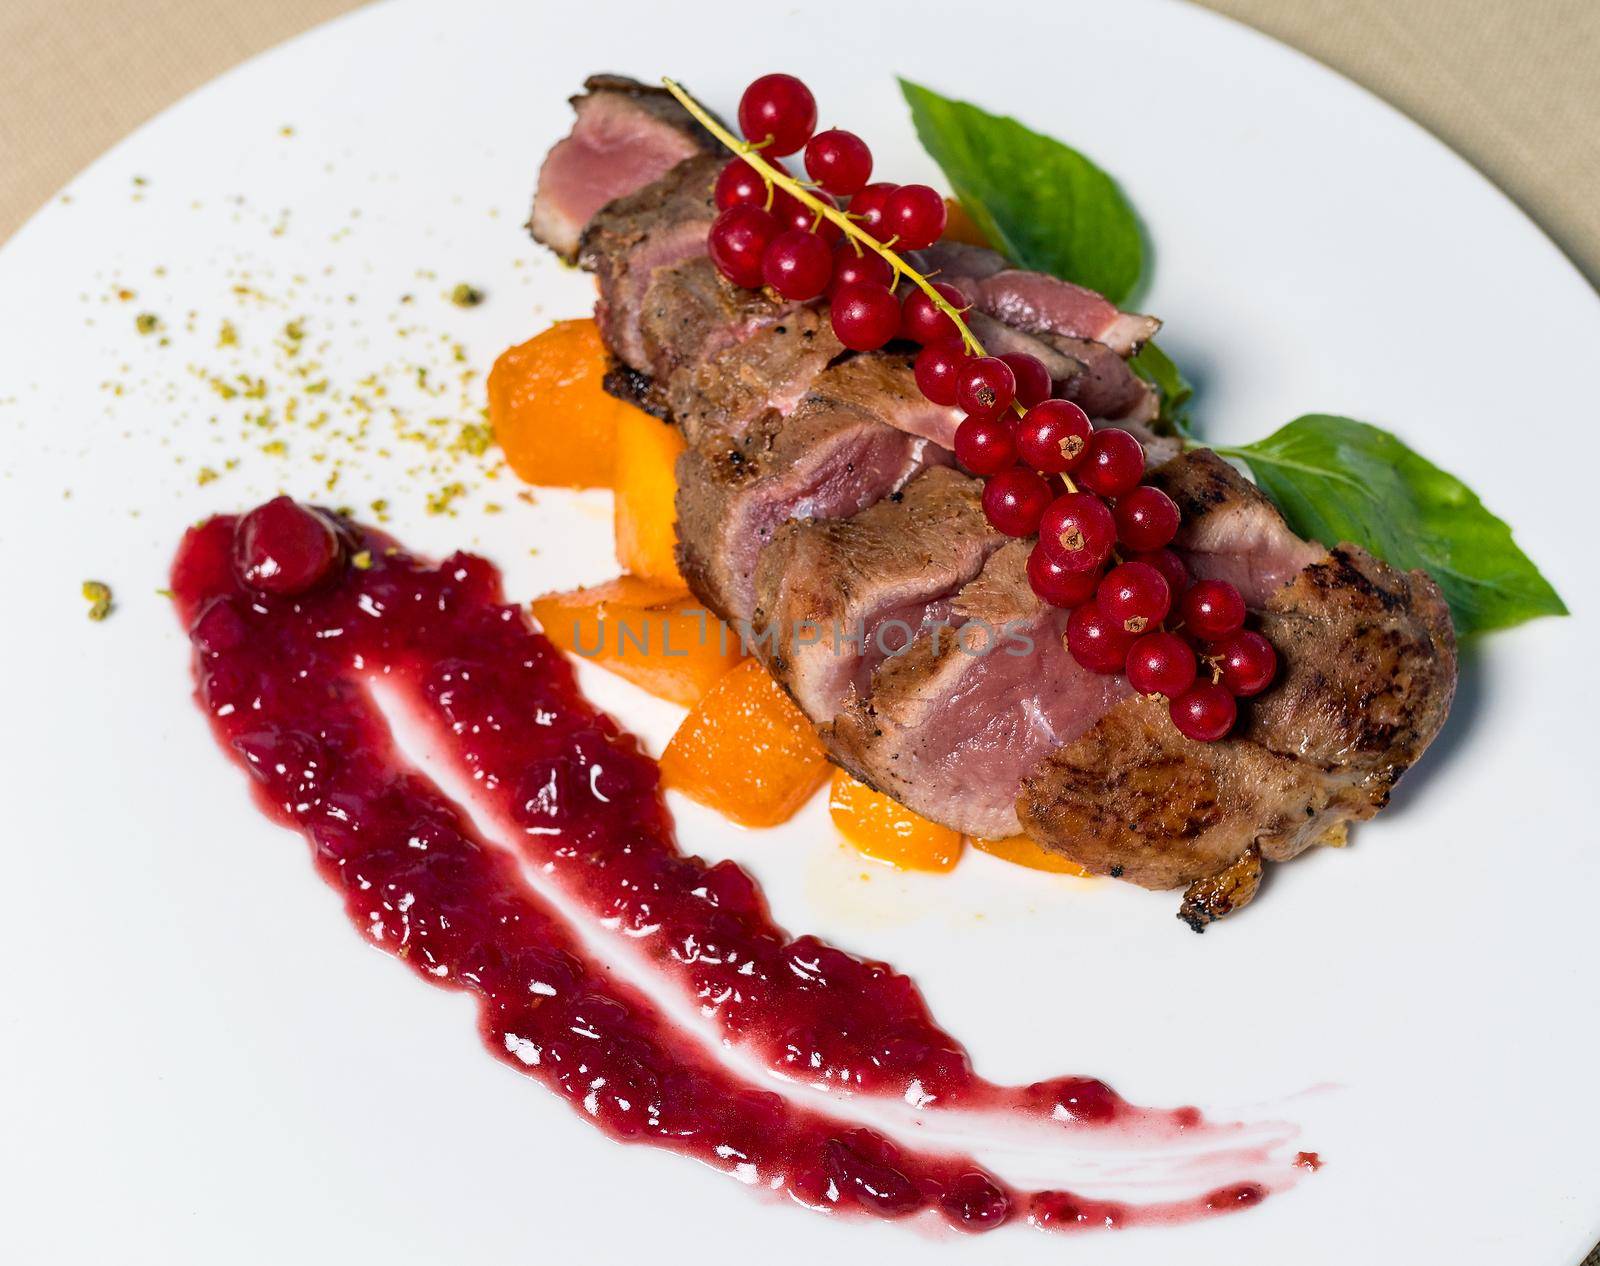 Cooked Steak with Lingonberry on it by ferhad